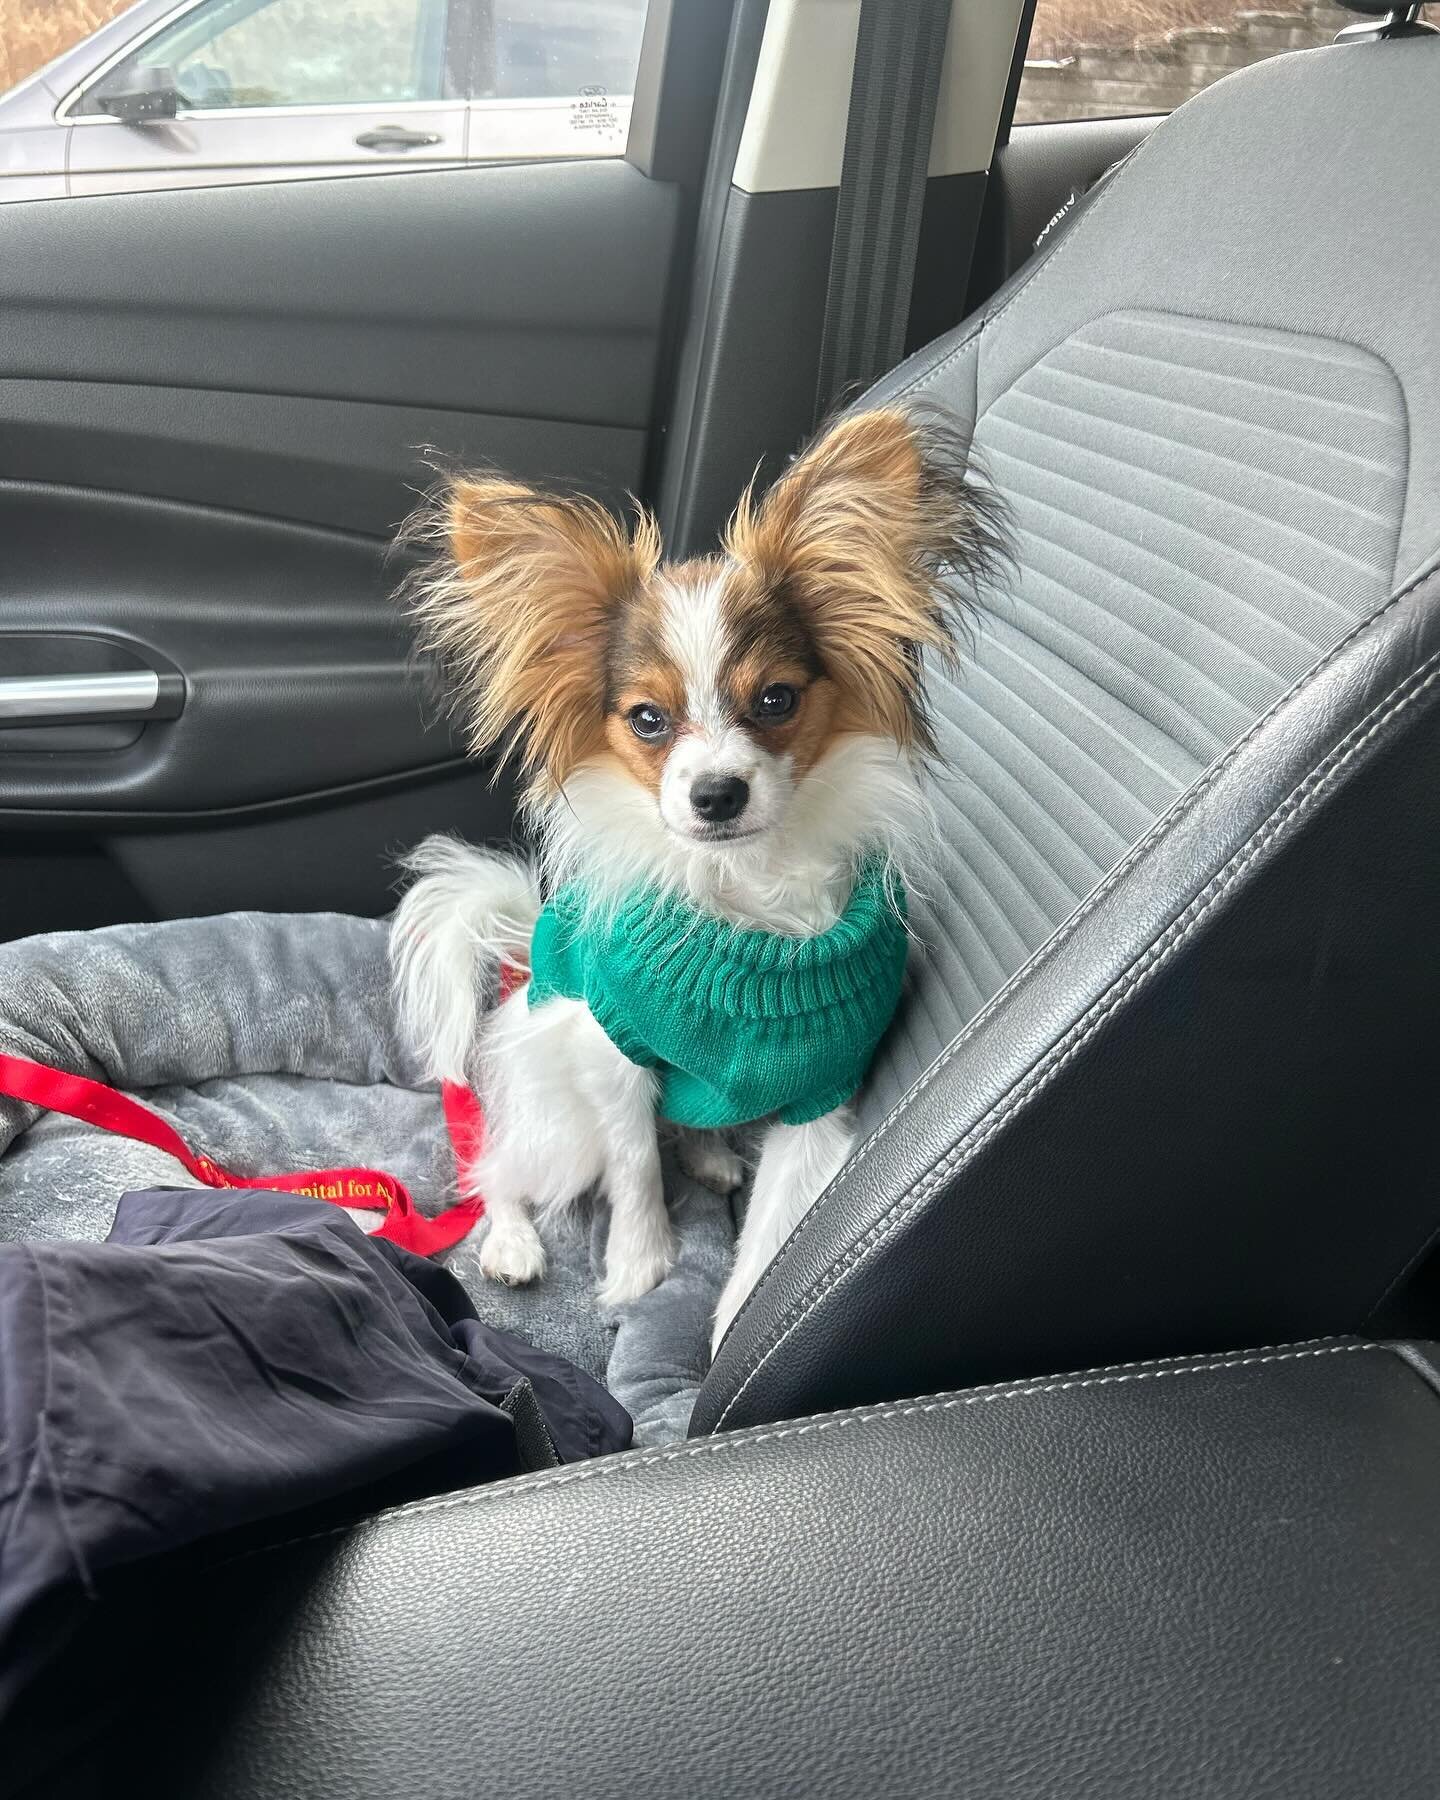 Taz, one of my puppies who is owned and loved by my friend who also works at my vet clinic :) #papillon #papillons #papillonsofinstagram #papillonlove #papillondog #papillonpuppies #doglove #dogsofinstagram #dogsofinsta #puppylove #puppygram #puppies